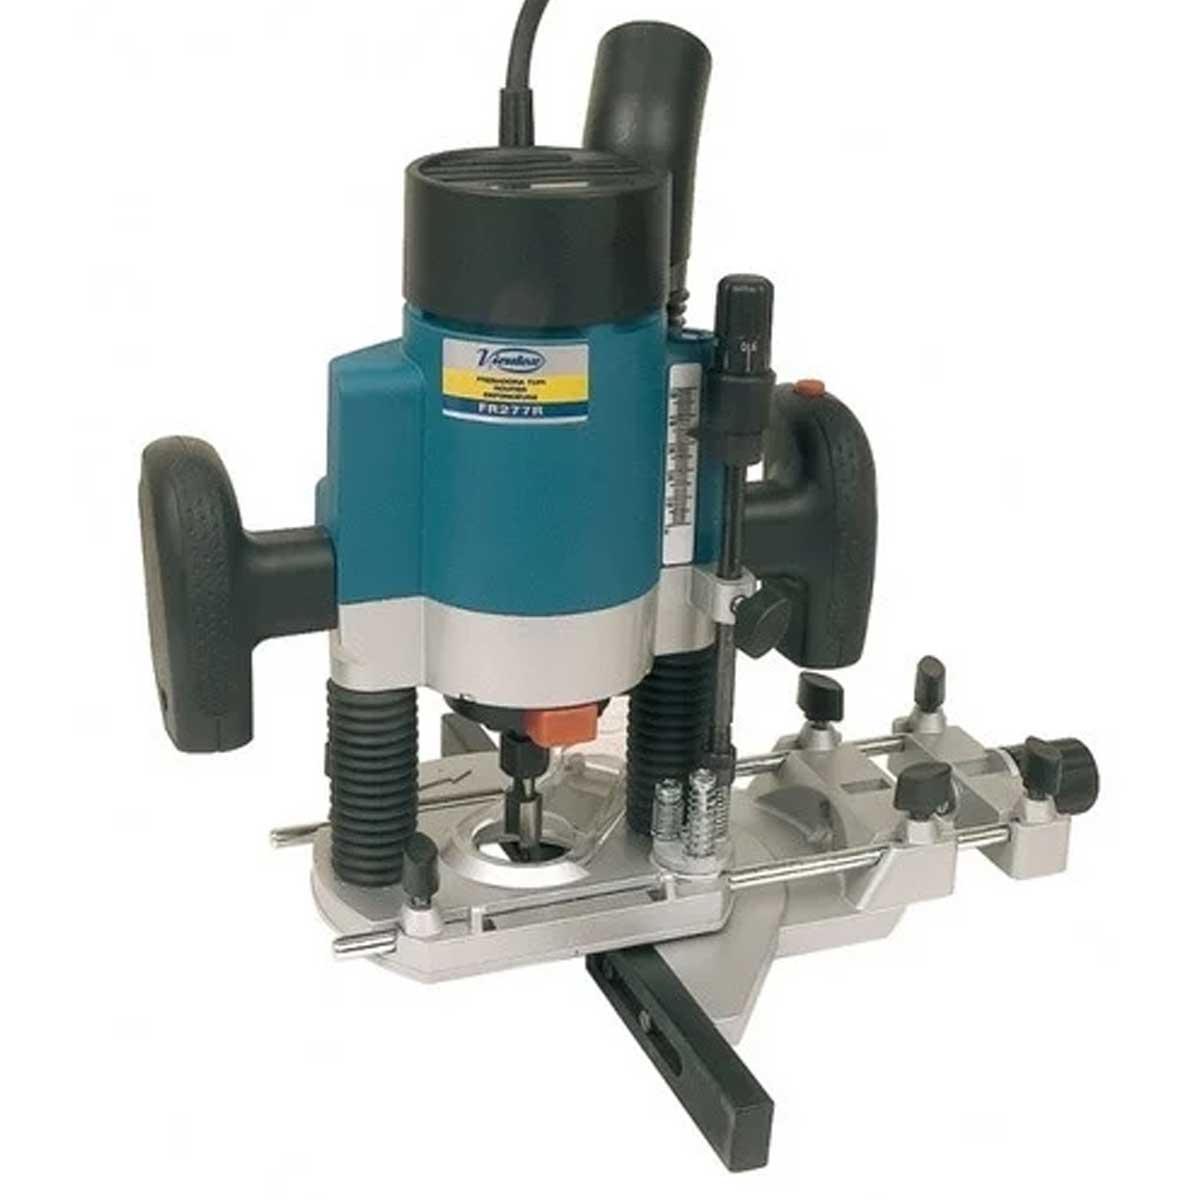 Surface Router Manufacturers, Suppliers in Kanpur